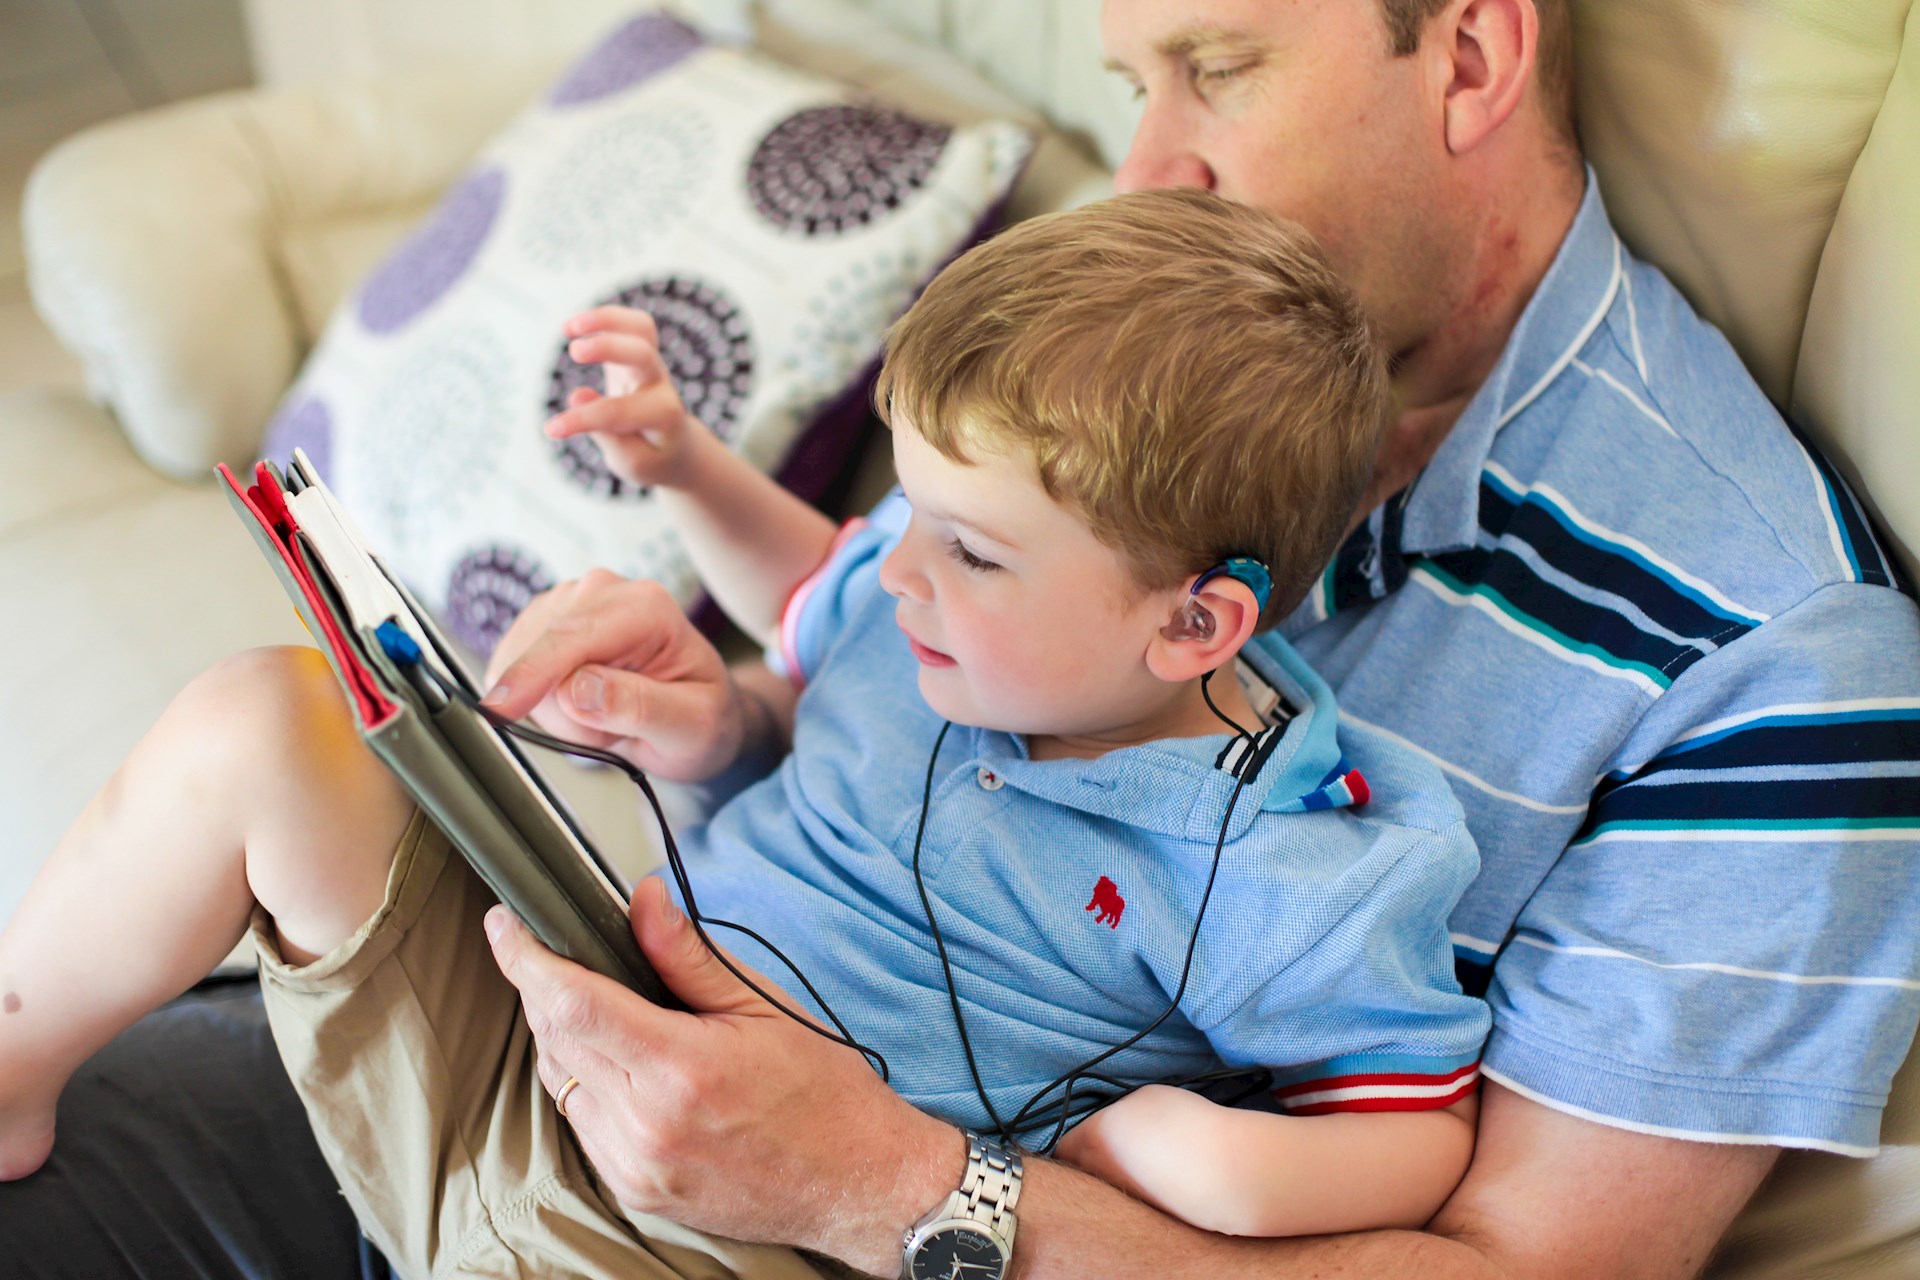 A deaf child with a hearing aid and a his dad watching a tablet together